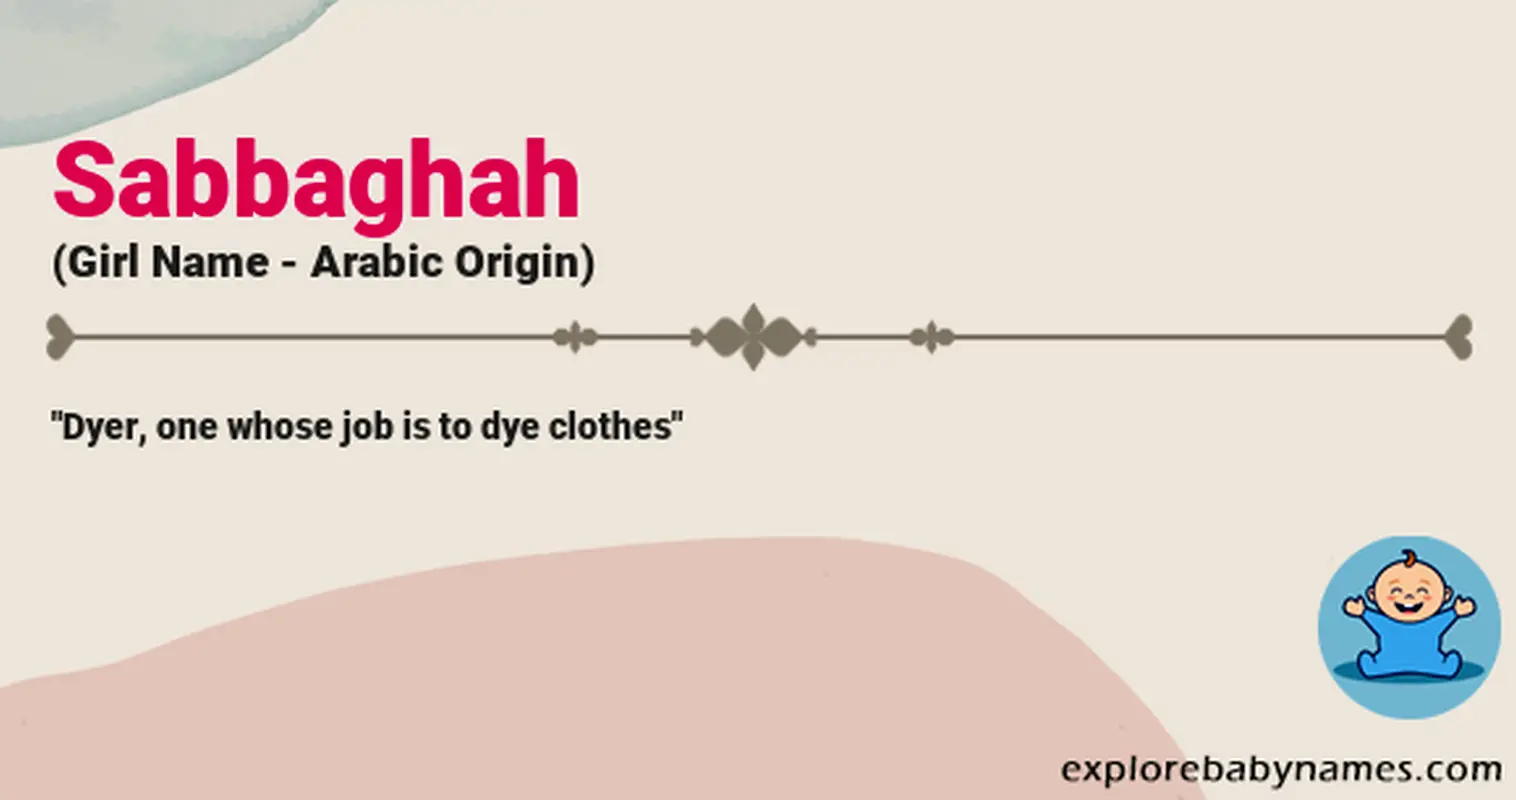 Meaning of Sabbaghah